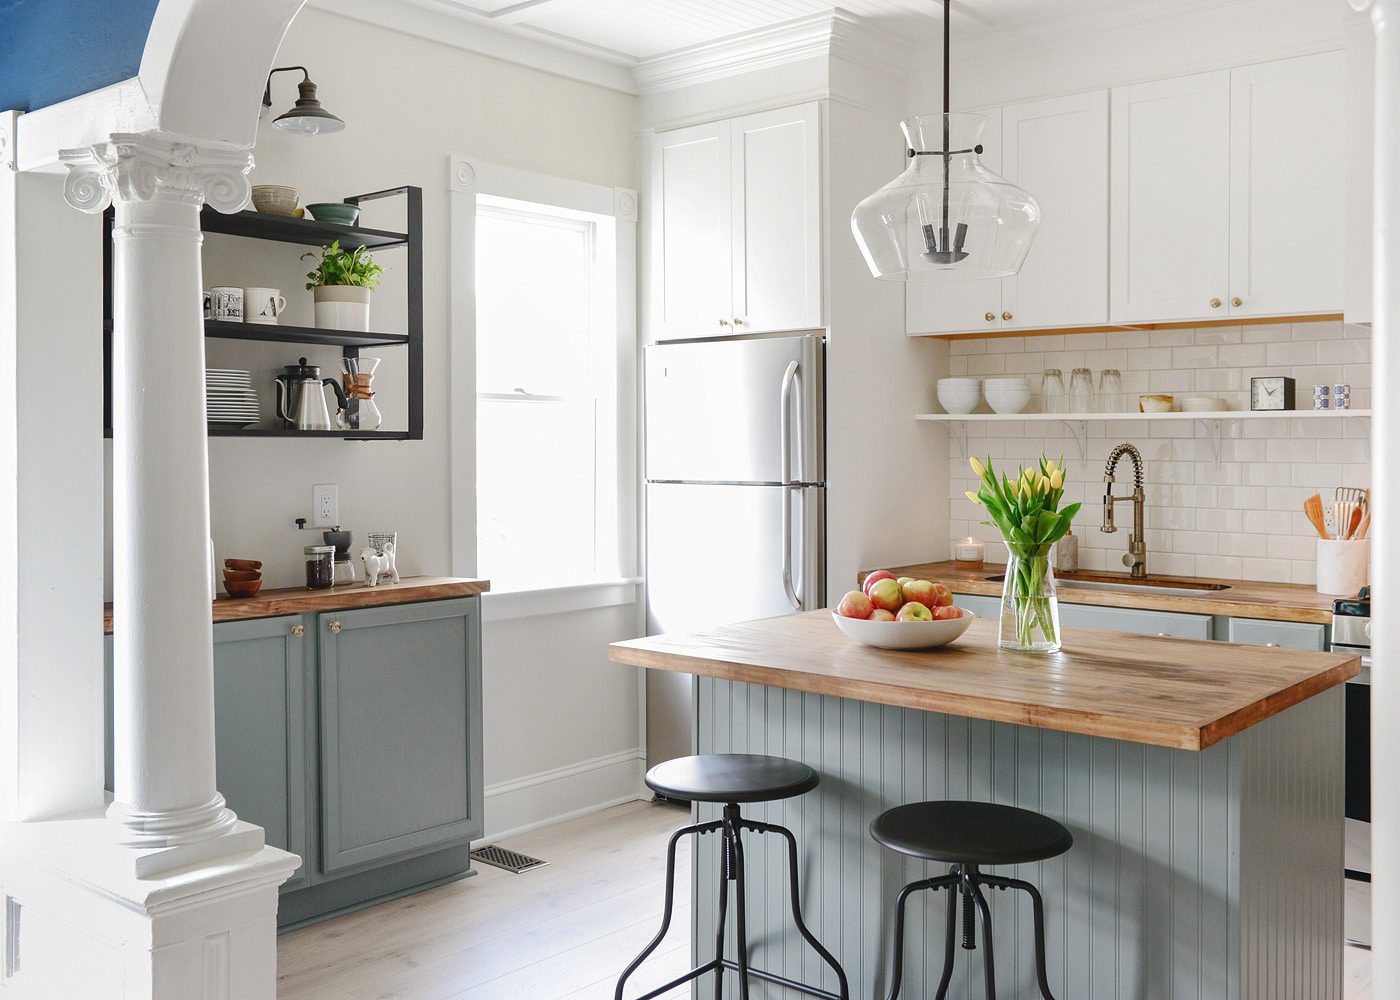 Lowe's Kitchen Makeover: Baltimore Edition! | Yellow Brick Home